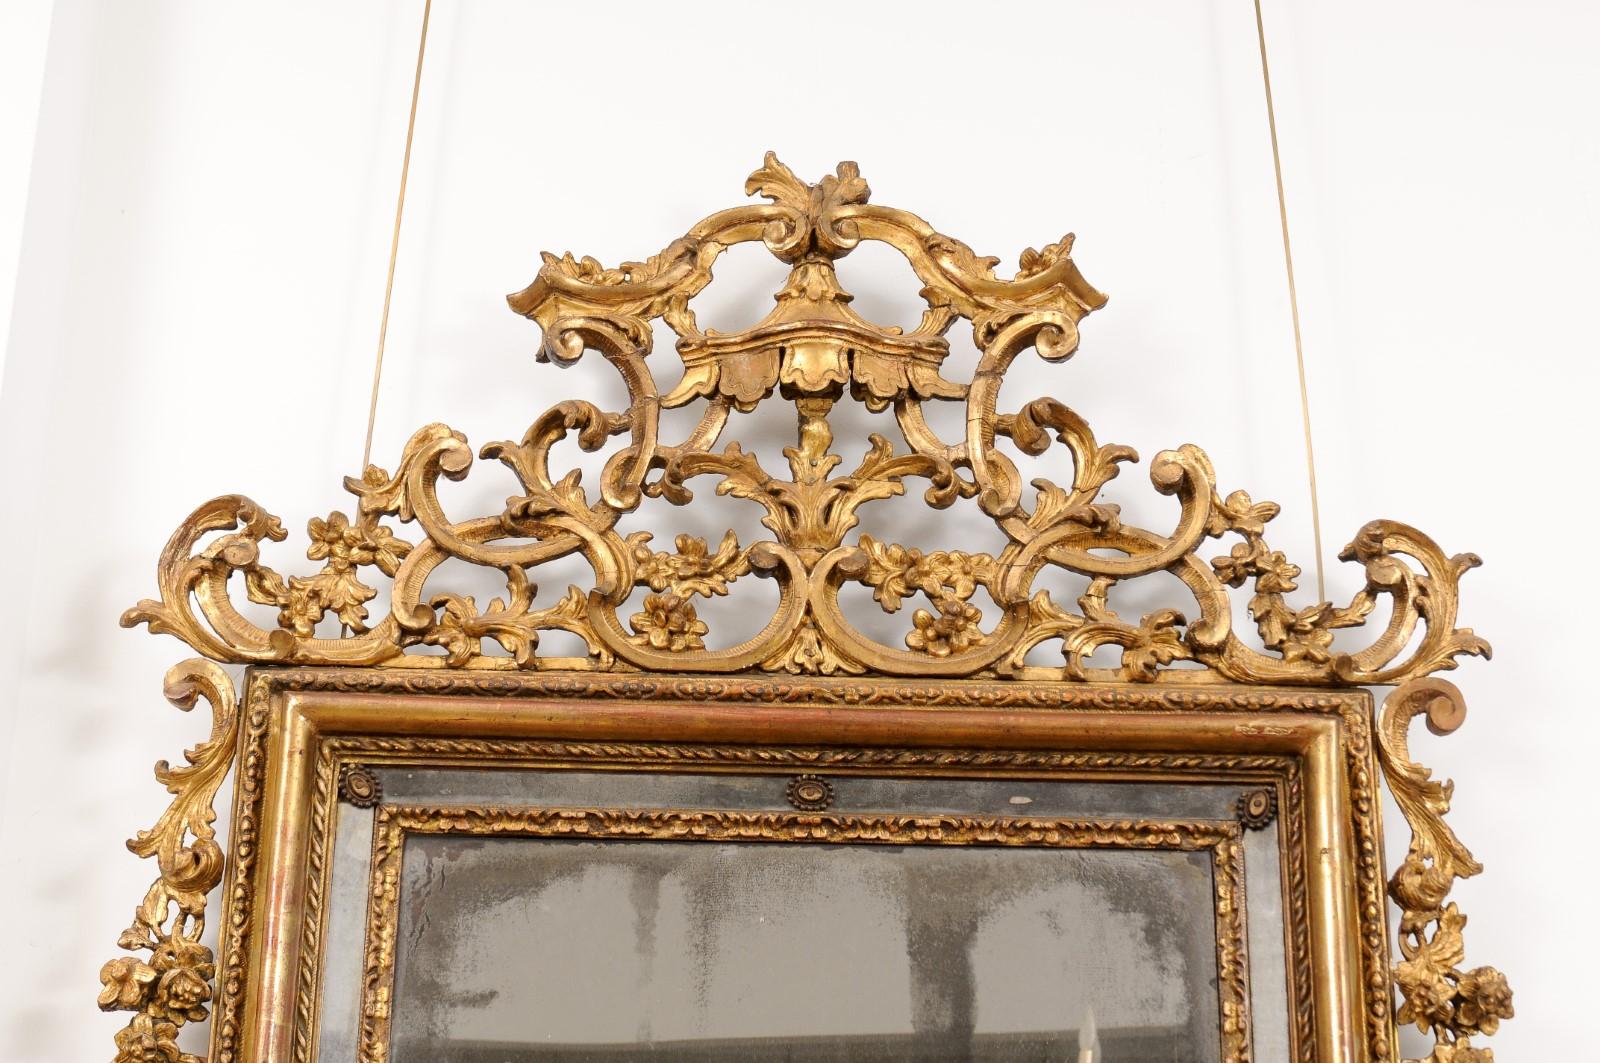 Large 18th Century Italian Rococo Giltwood Mirror with Pagoda Top For Sale 6